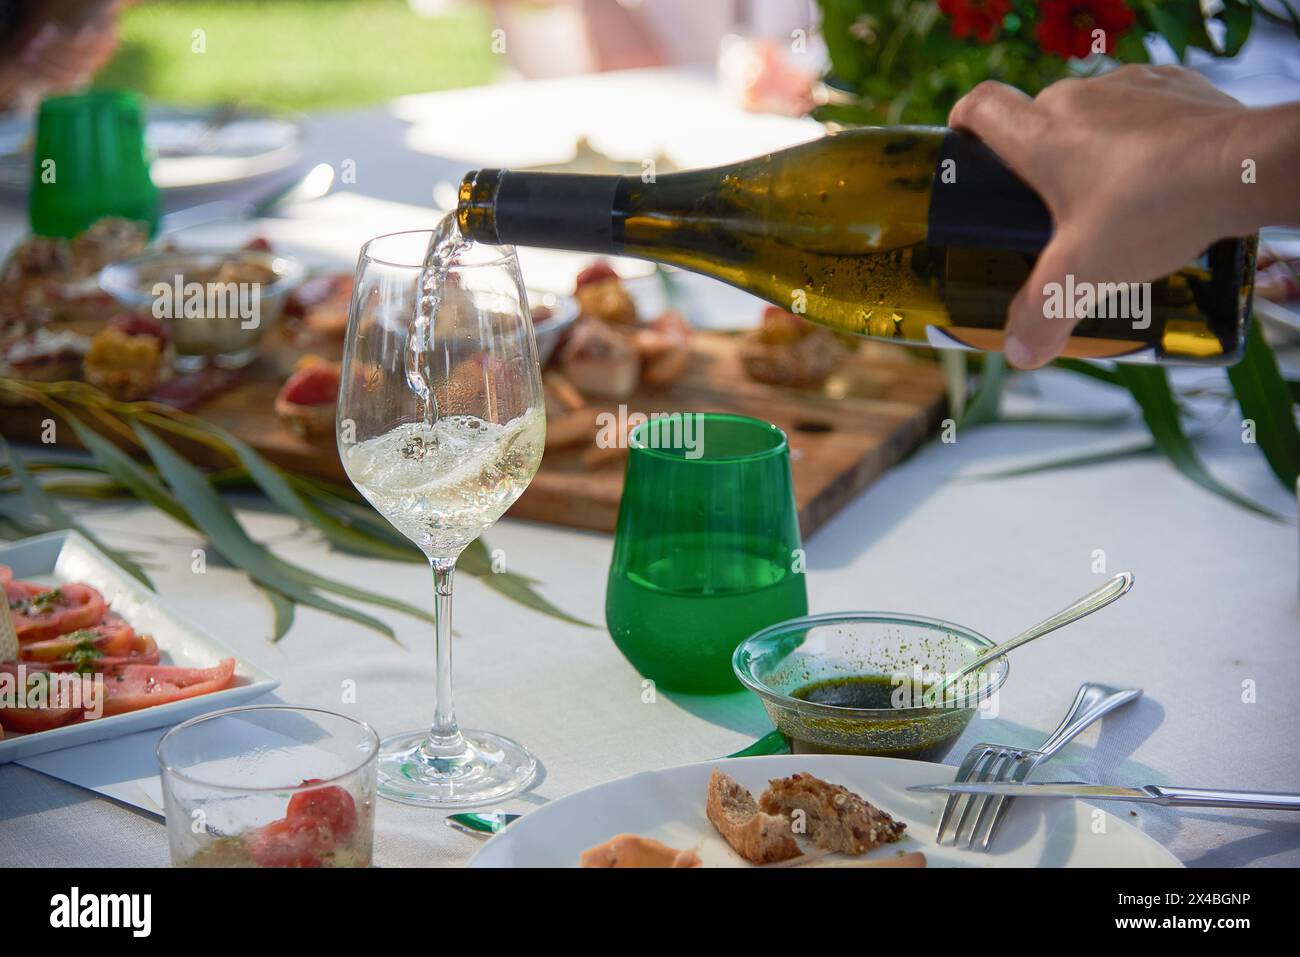 Hand pouring white wine into a glass, surrounded by delicious appetizers. Festive and sunny atmosphere Stock Photo